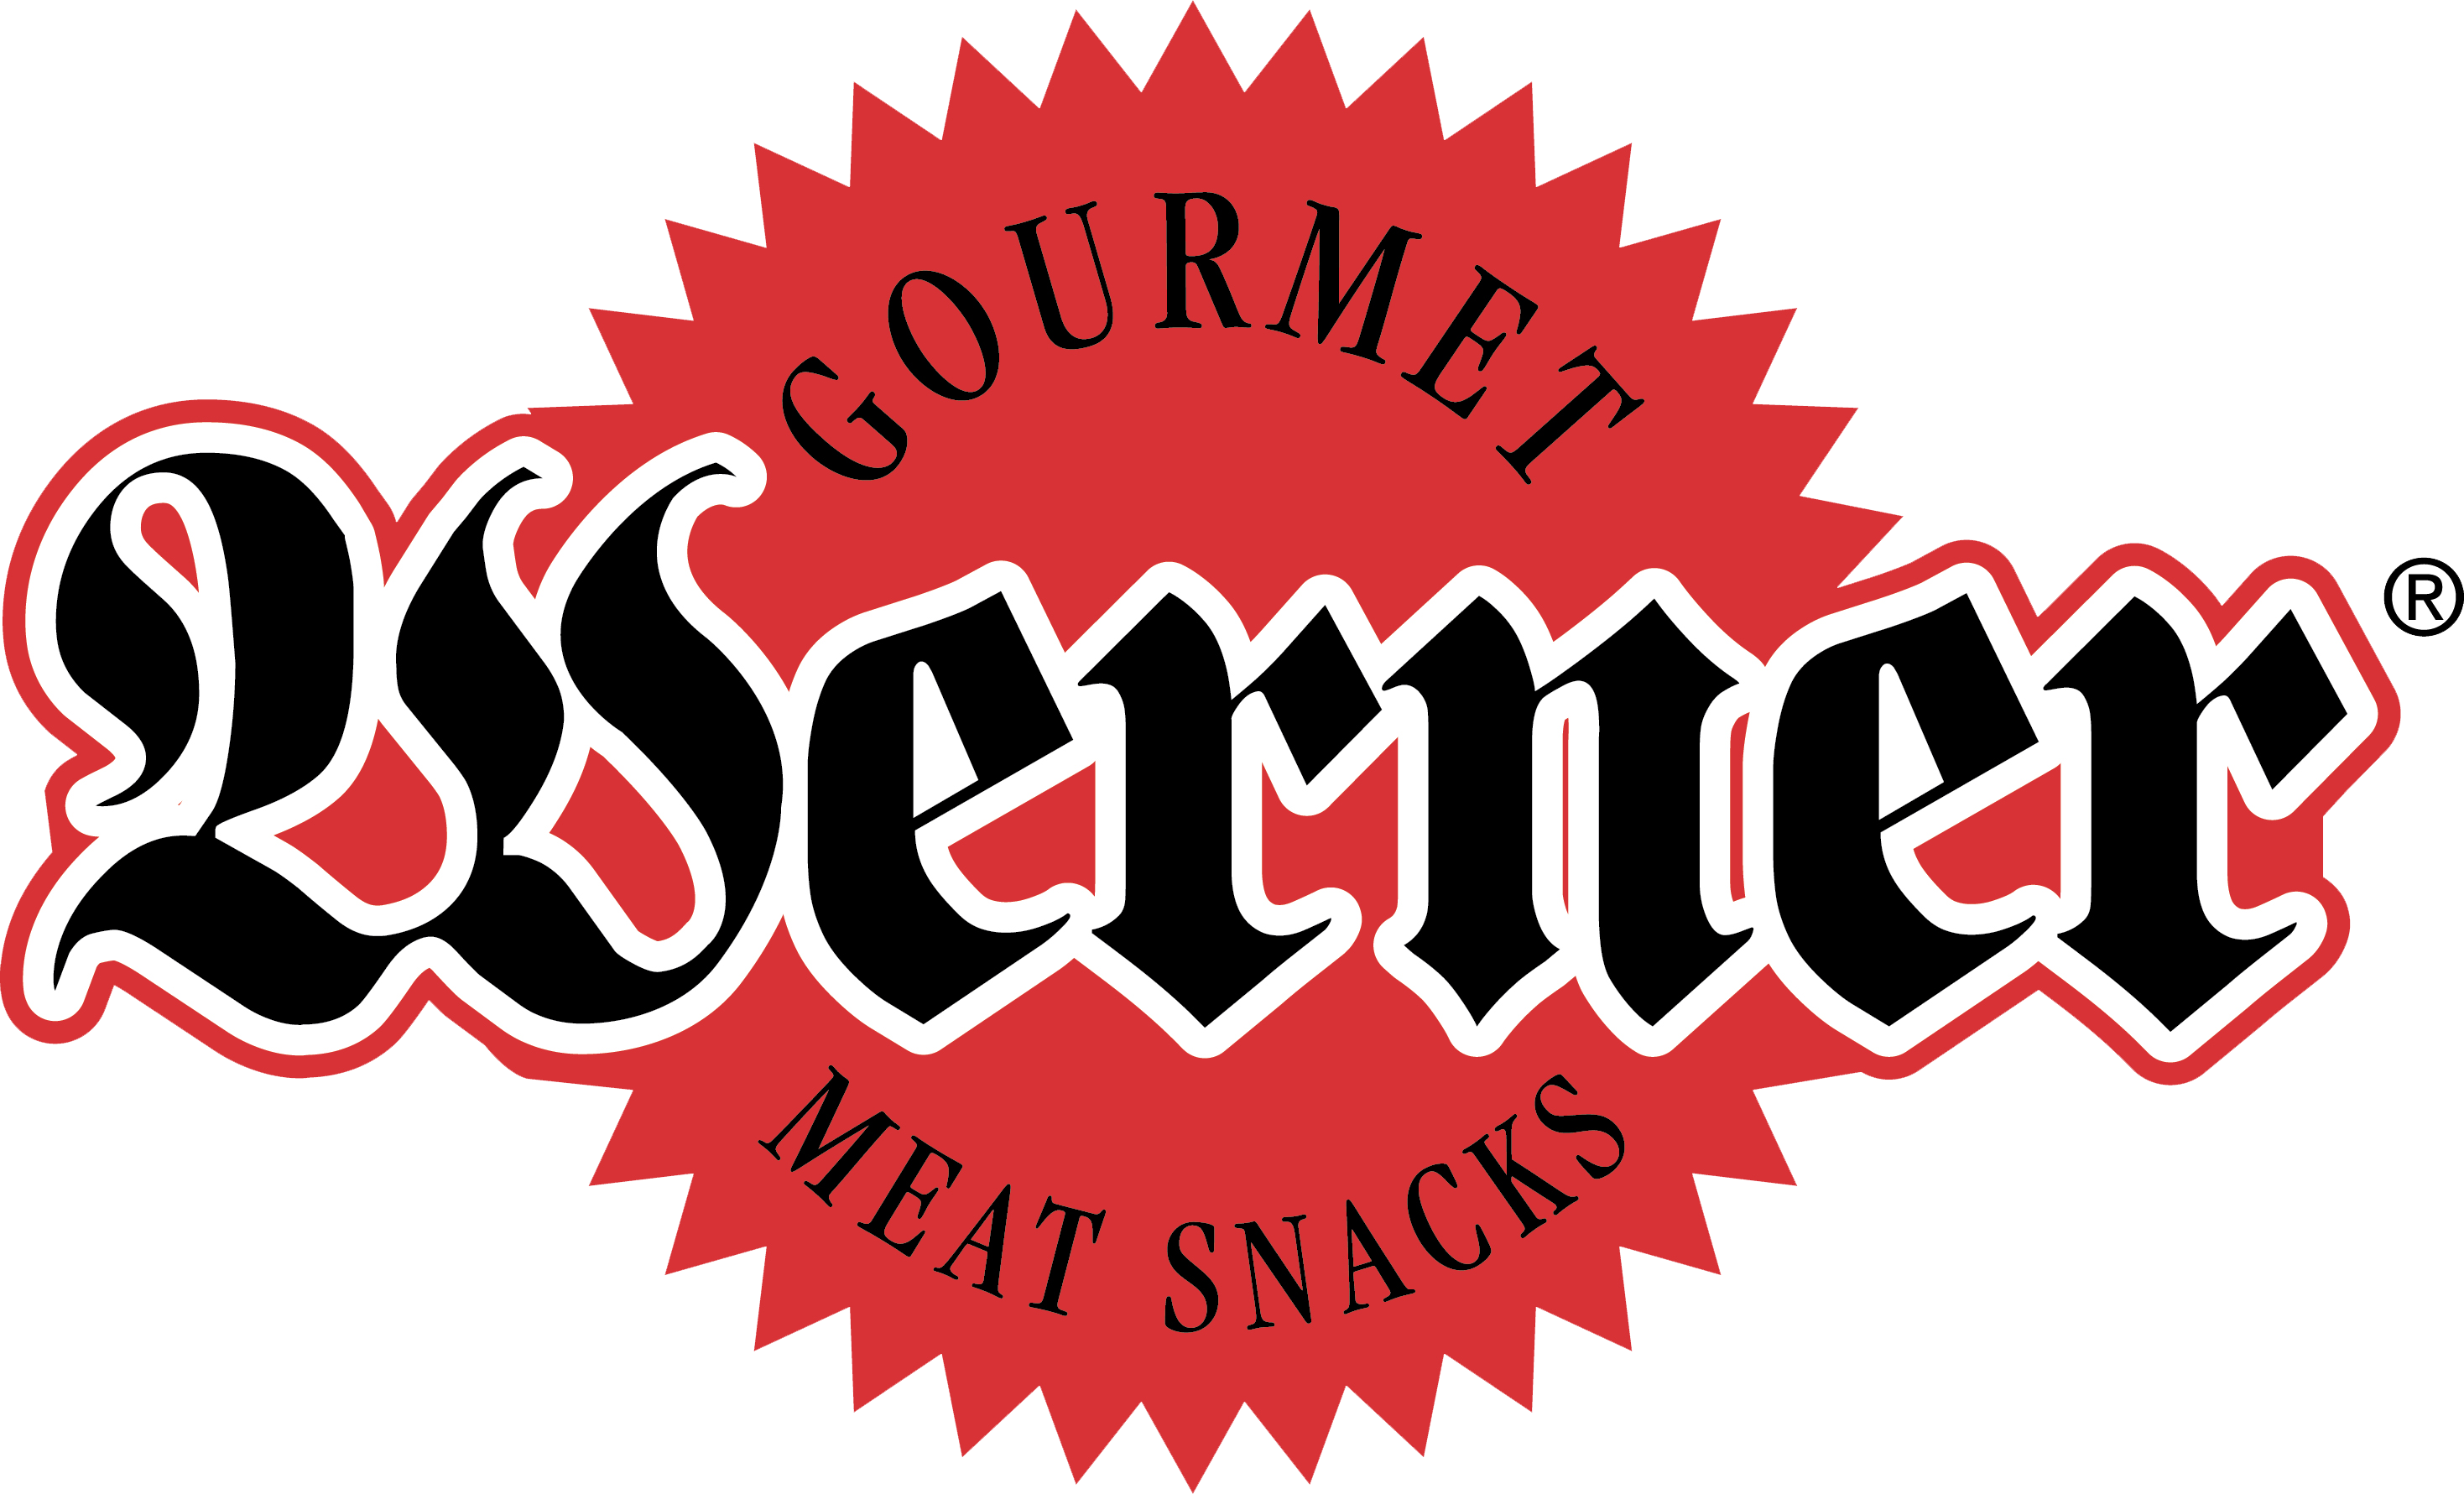 Werner Gourmet Meat Snacks Employee Recognized with National Food Safety Award